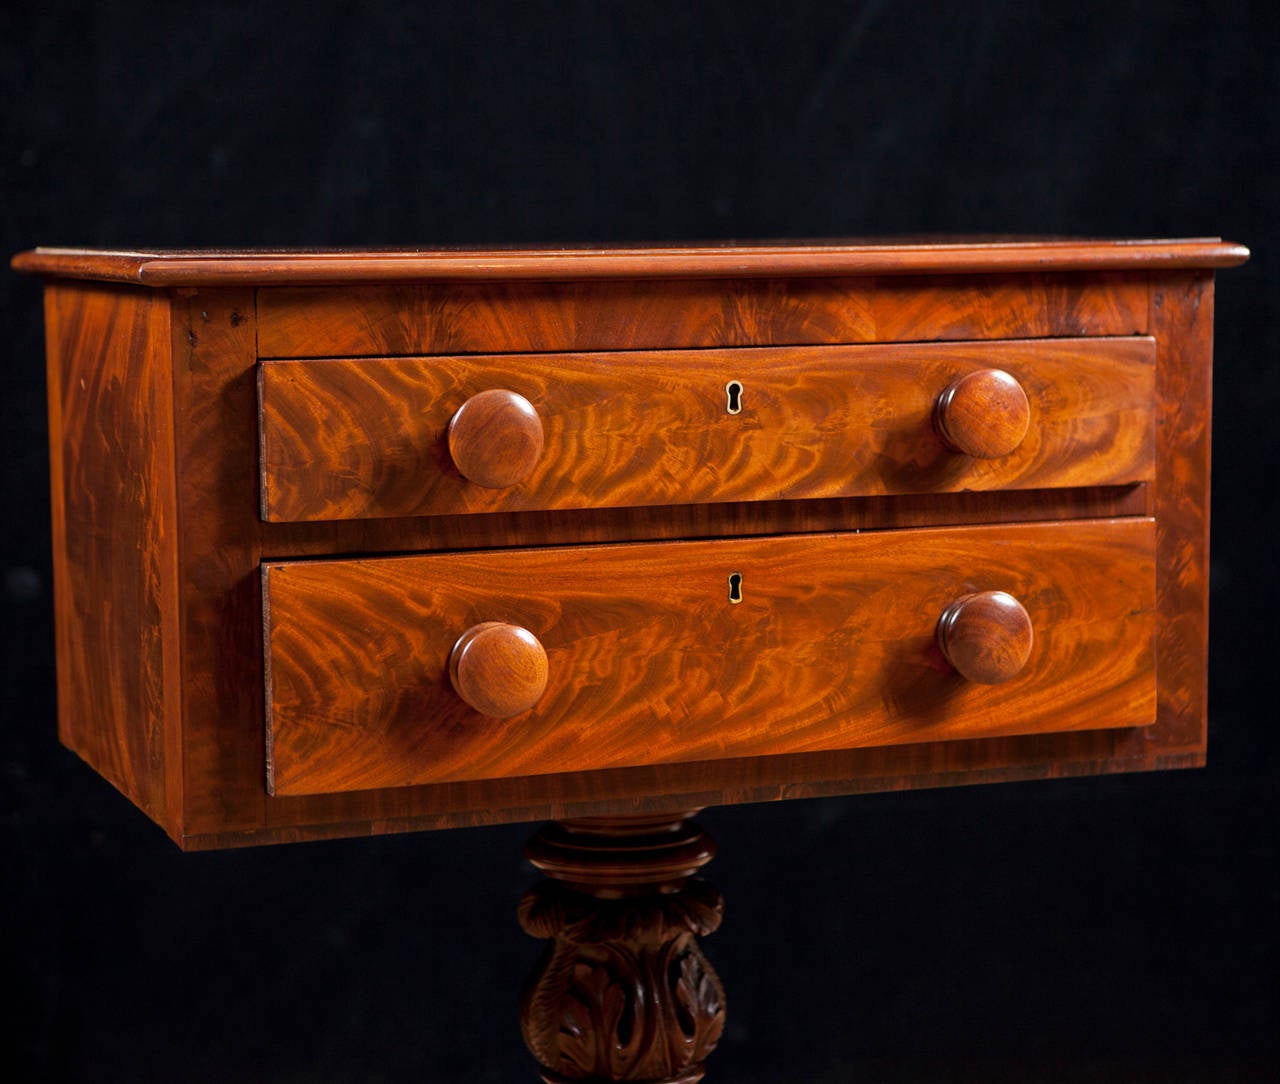 Polished American Empire Work Table in Mahogany, circa 1825